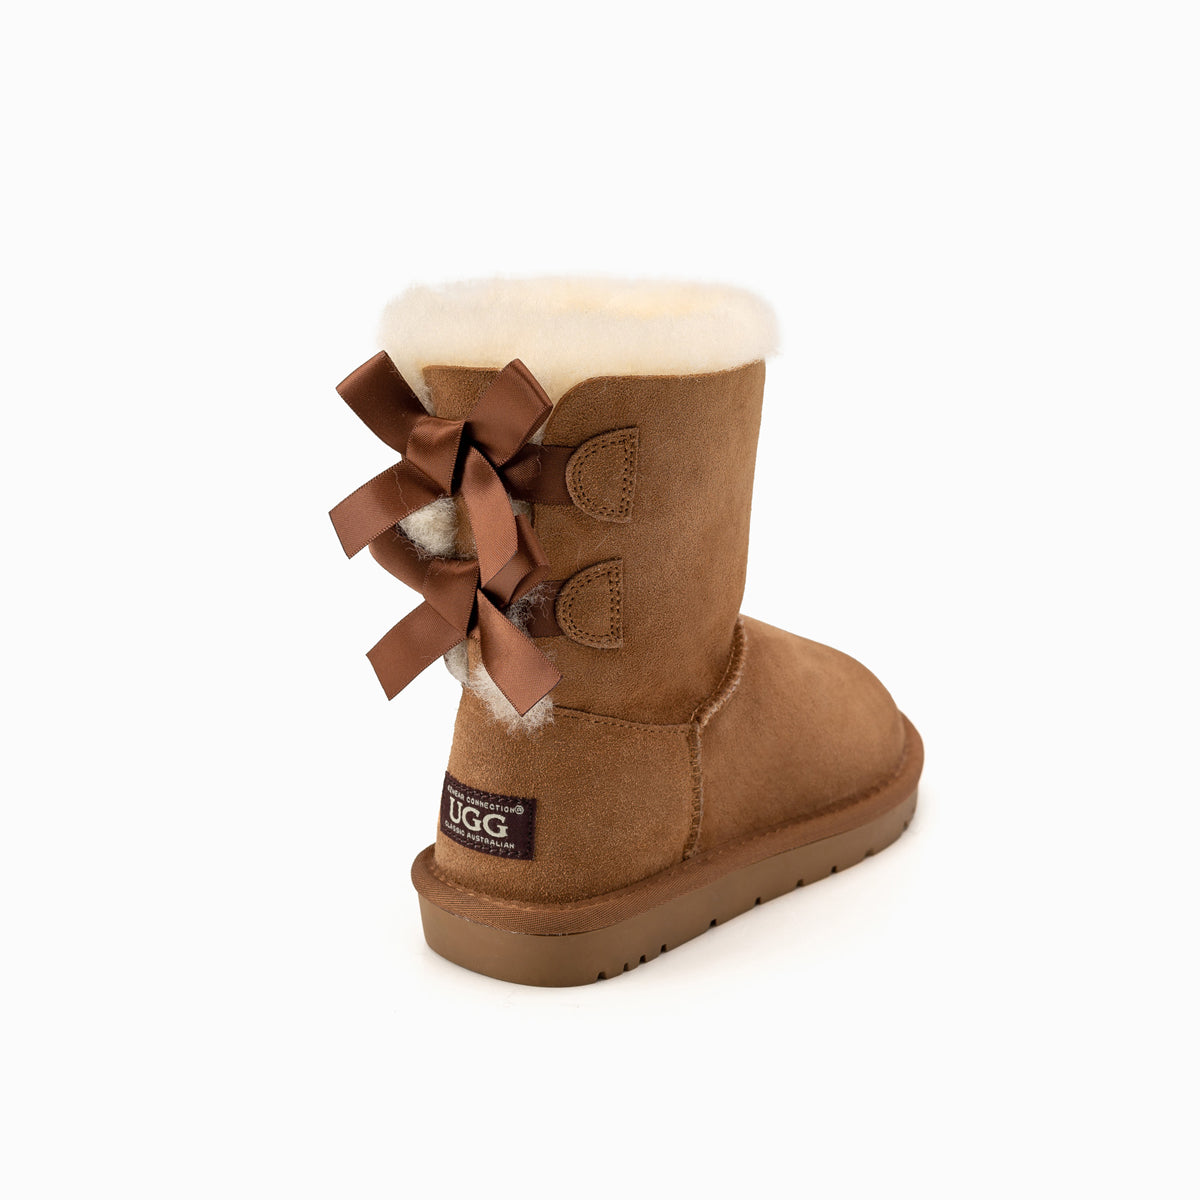 Ugg Kids 2 Ribbon Boots (Water Resistant)